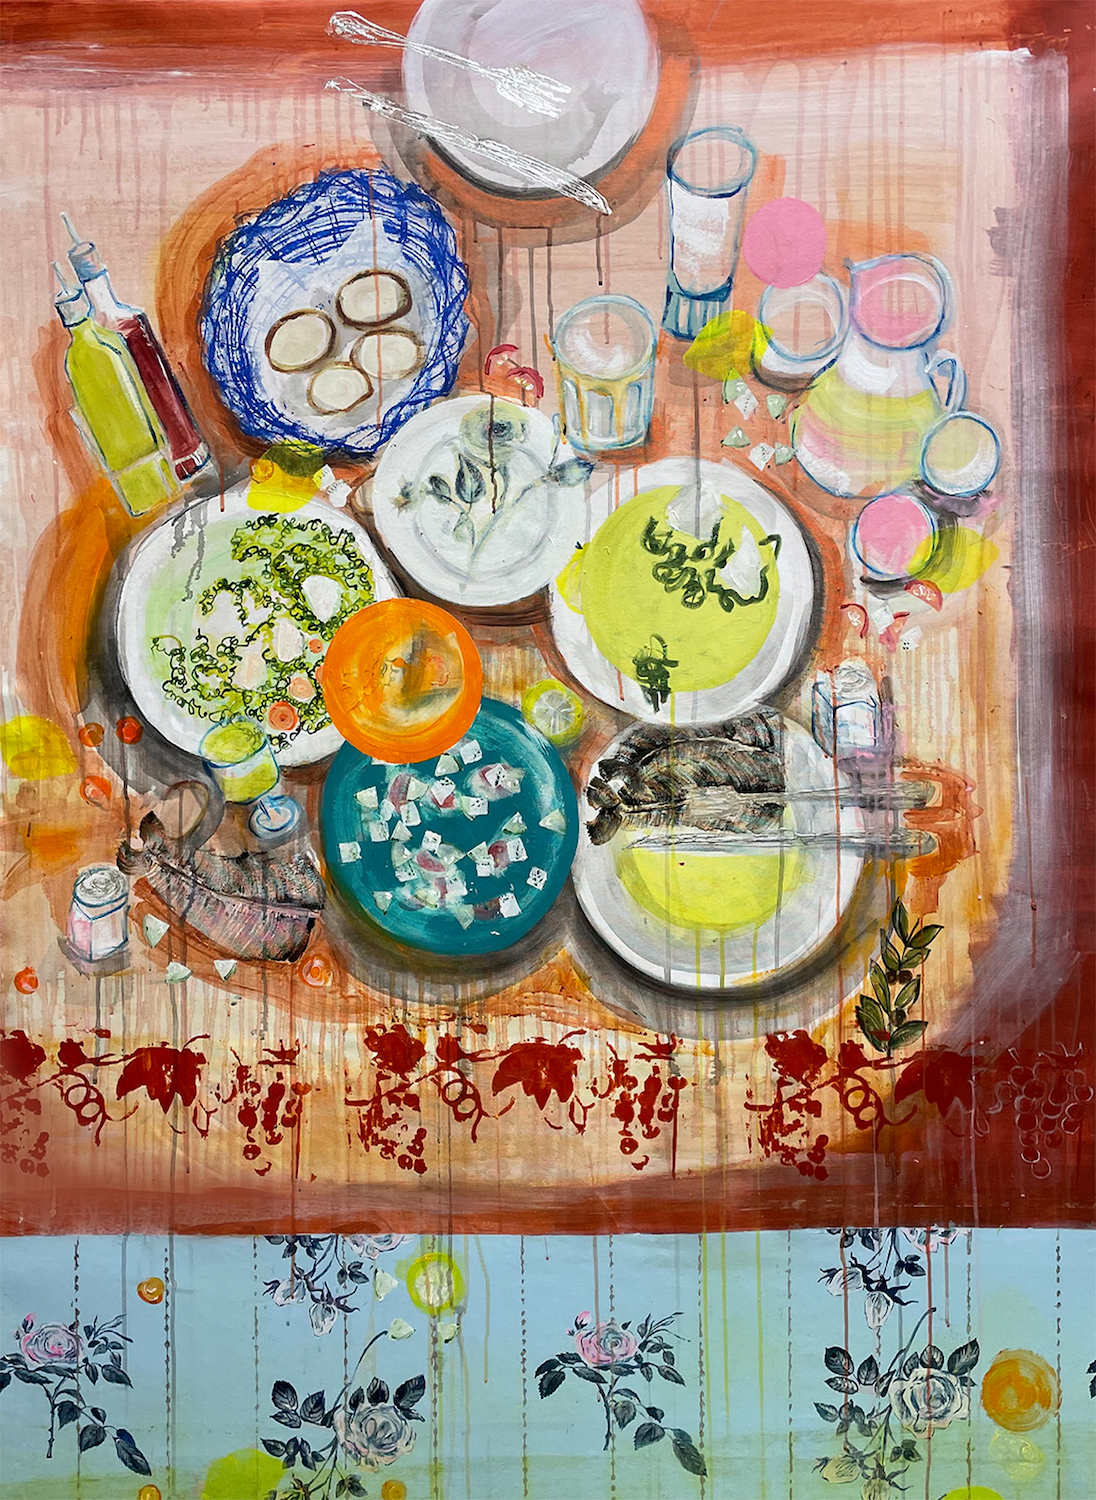 'Filling Plates', Kally Laurence, Acrylic on canvas, 150 x 130 cm